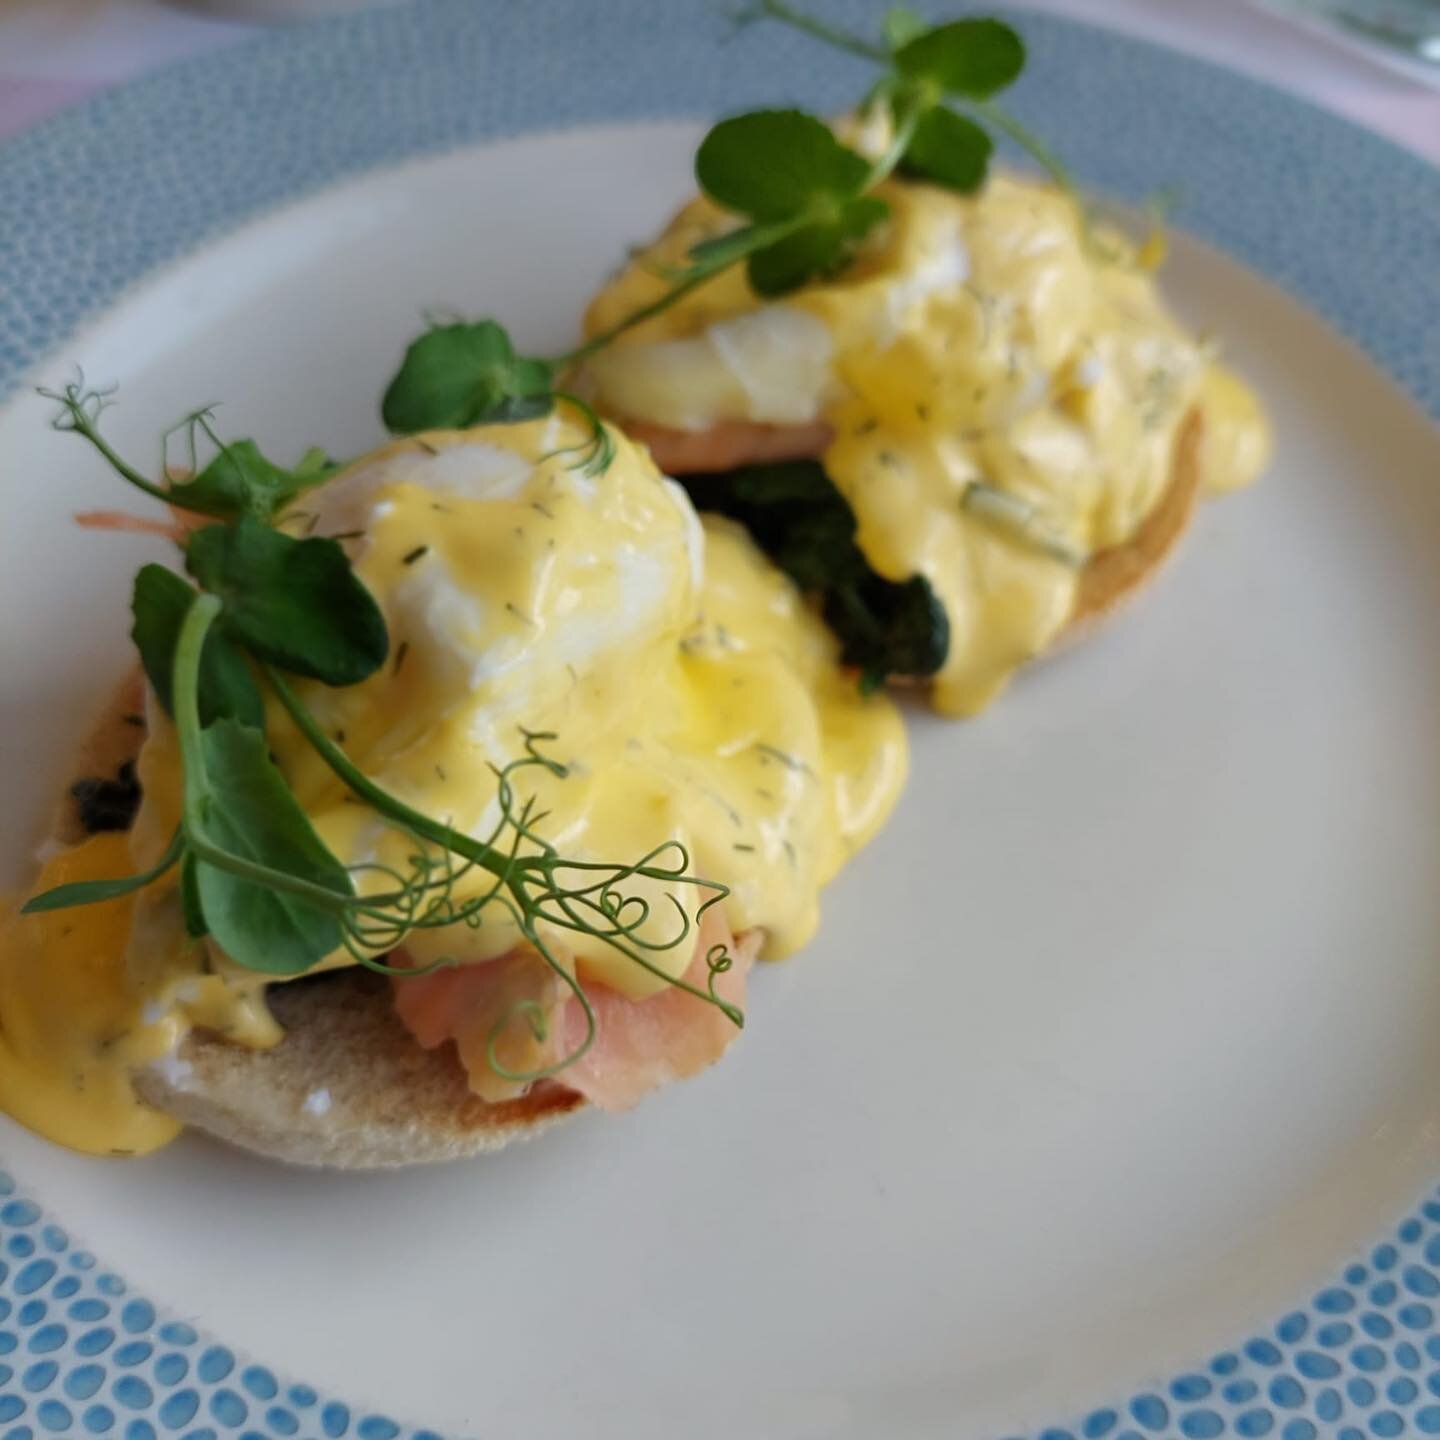 Treat yourself to a delicious breakfast @upstairs.at.annas Eggs Royale a  toasted muffin, smoked salmon, poached egg and bearnaise sauce. The perfect start to the day. 

#breakfast #breakfastideas #eggsroyale #salmon #smokedsalmon